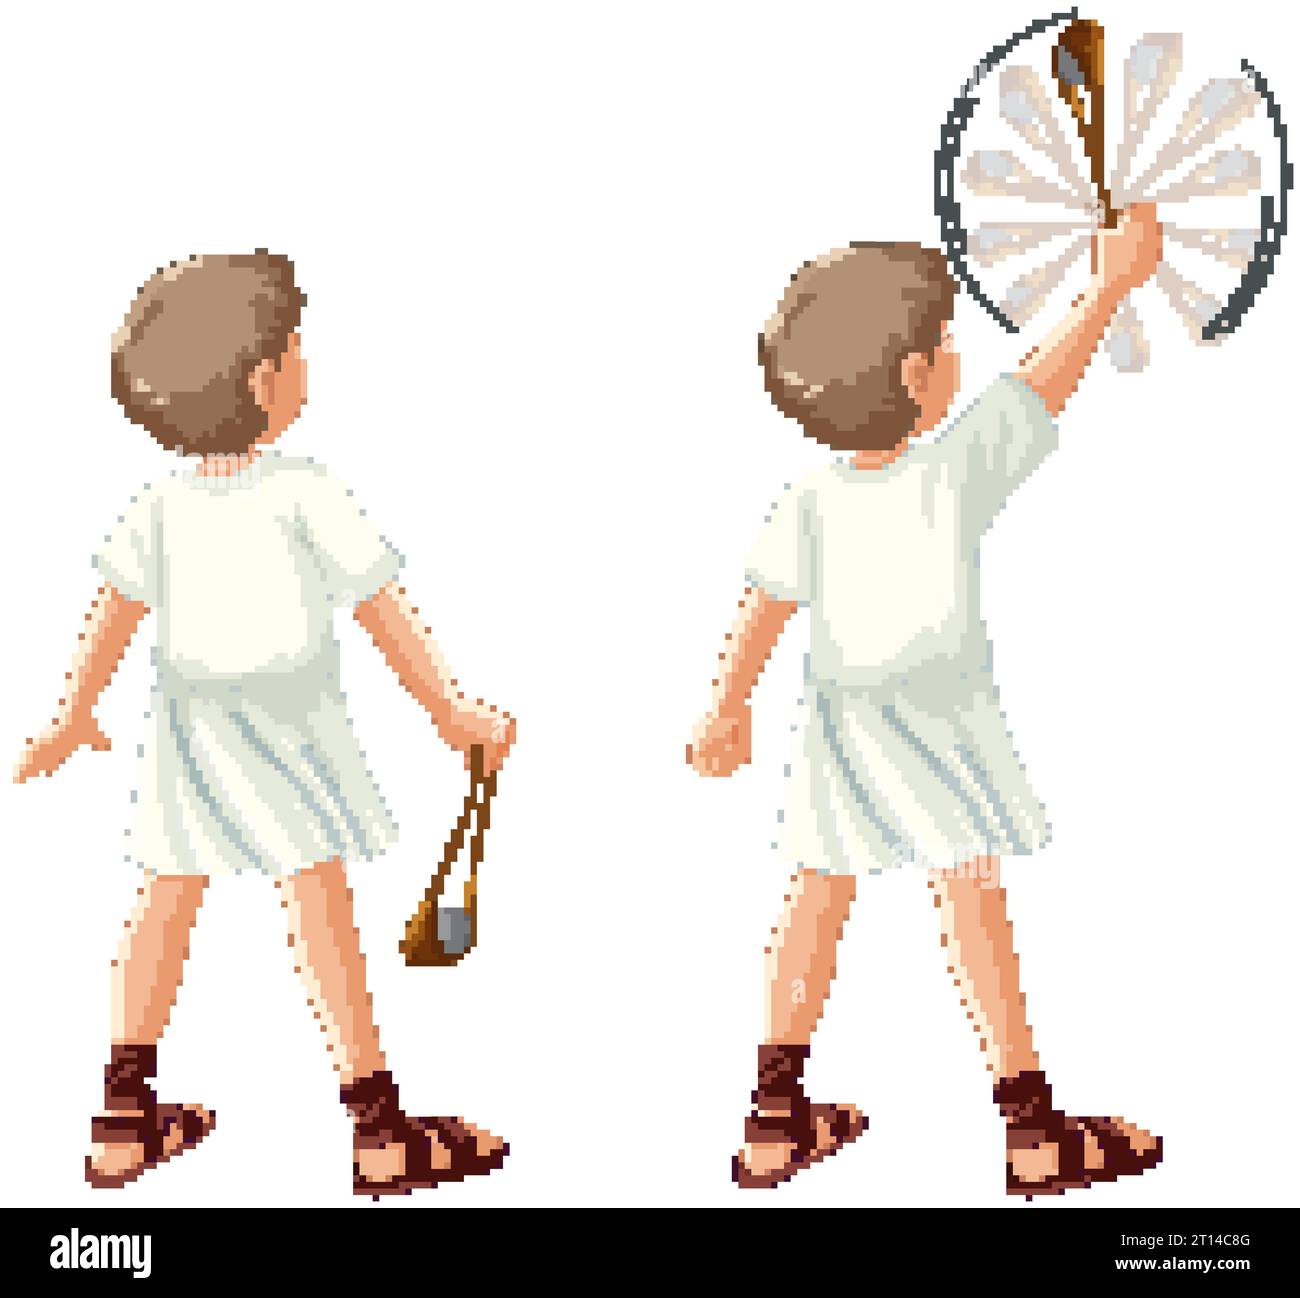 Illustration of David, the biblical character, using a sling to pull a stone Stock Vector